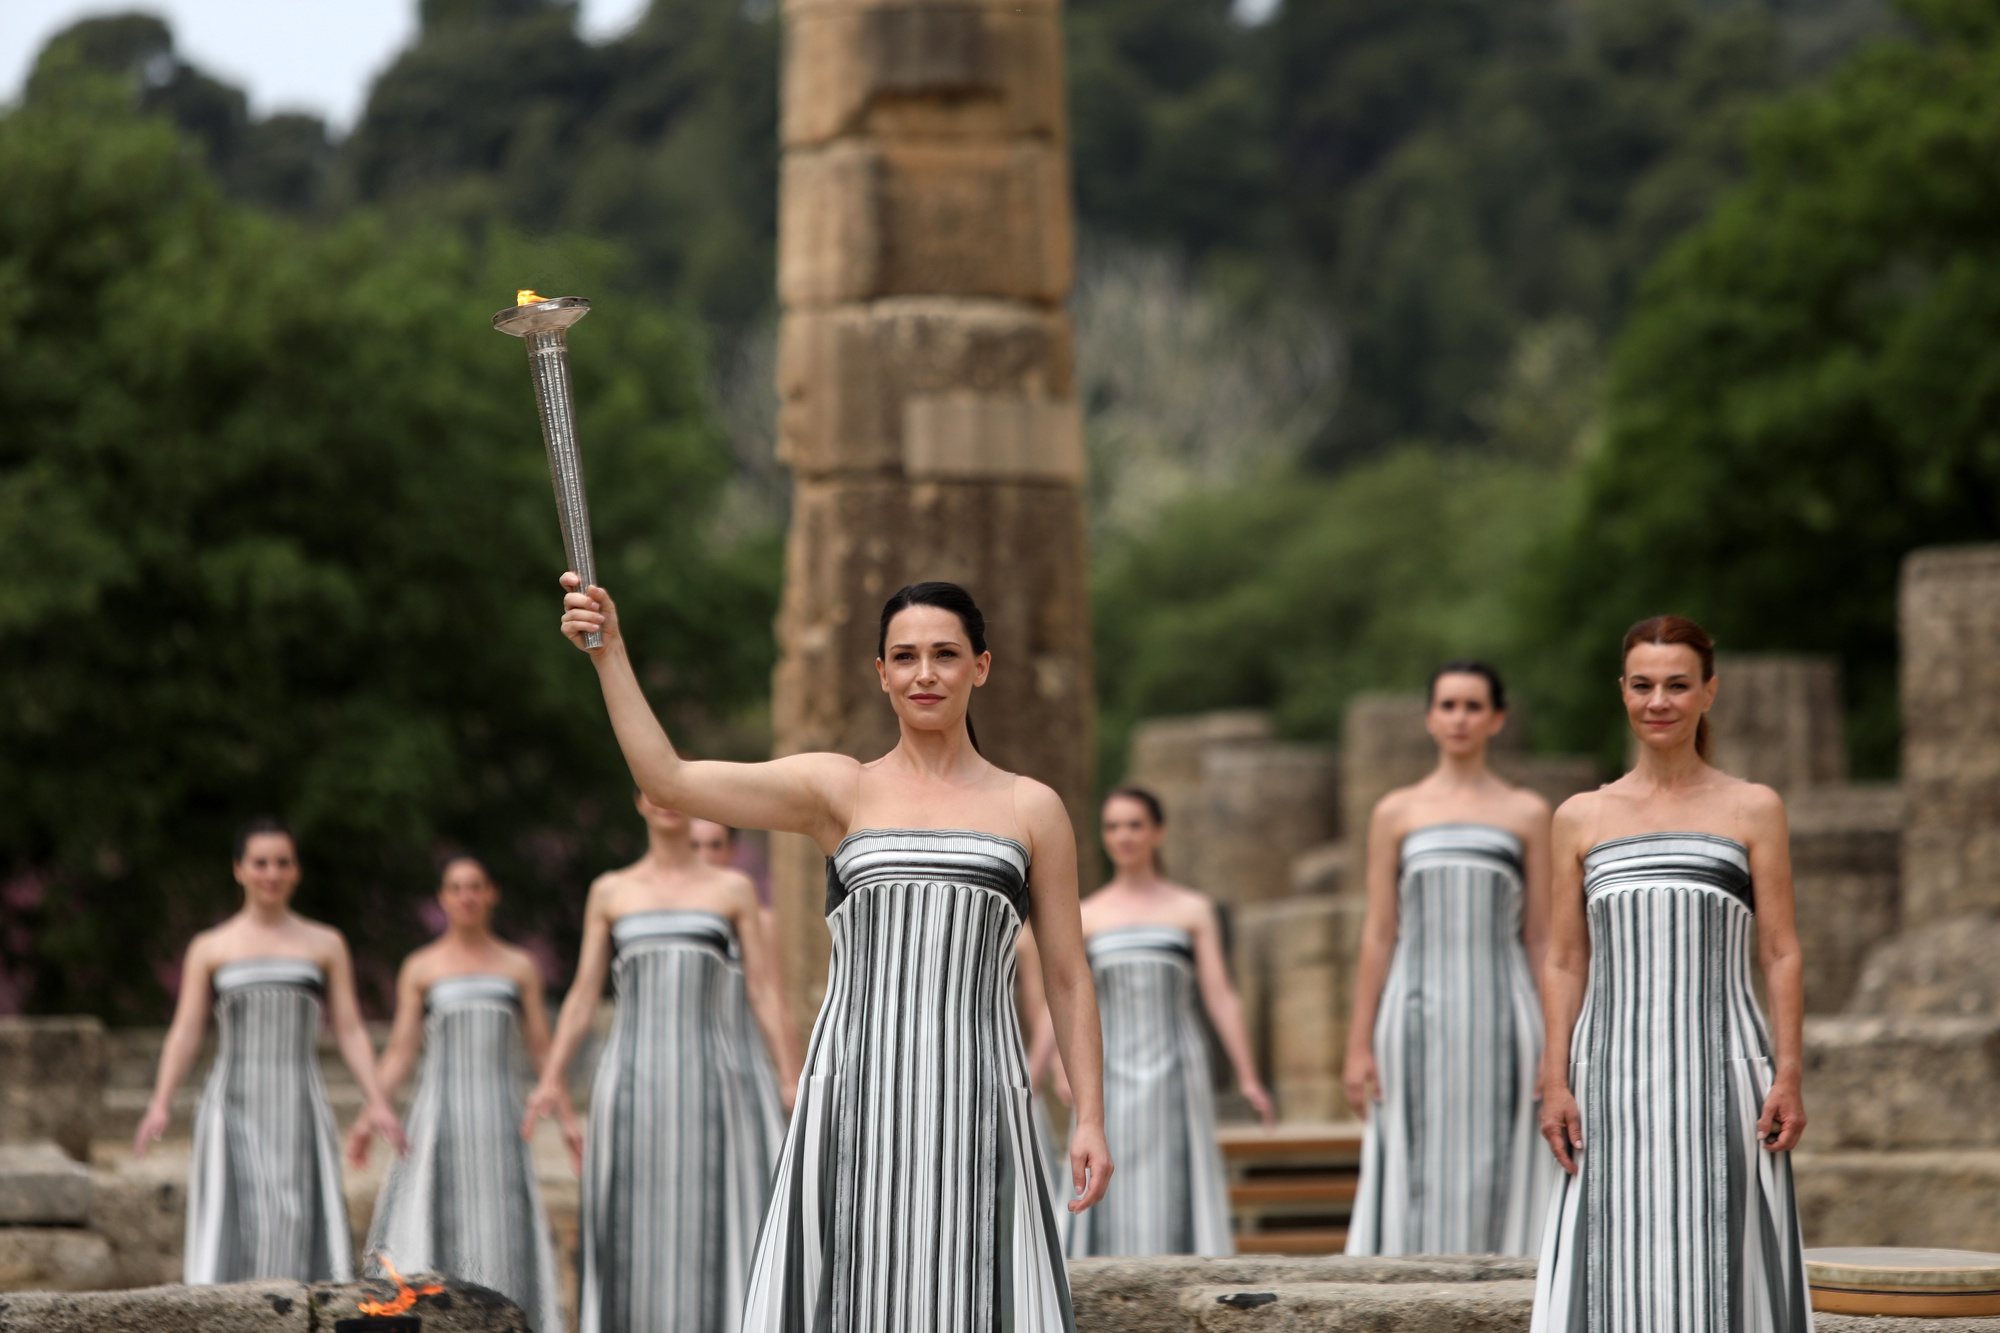 epa11281527 Greek actress Mary Mina, in the role of the High Priestess, raises the torch of the Olympic Flame during the Olympic Flame lighting ceremony for the Paris 2024 Summer Olympic Games, in front of the Hera Temple at the Ancient Olympia site, in southern Greece, 16 April 2024. The Summer Olympics Games will be held in Paris, France from 26 July to 11 August 2024.  EPA/GEORGE VITSARAS